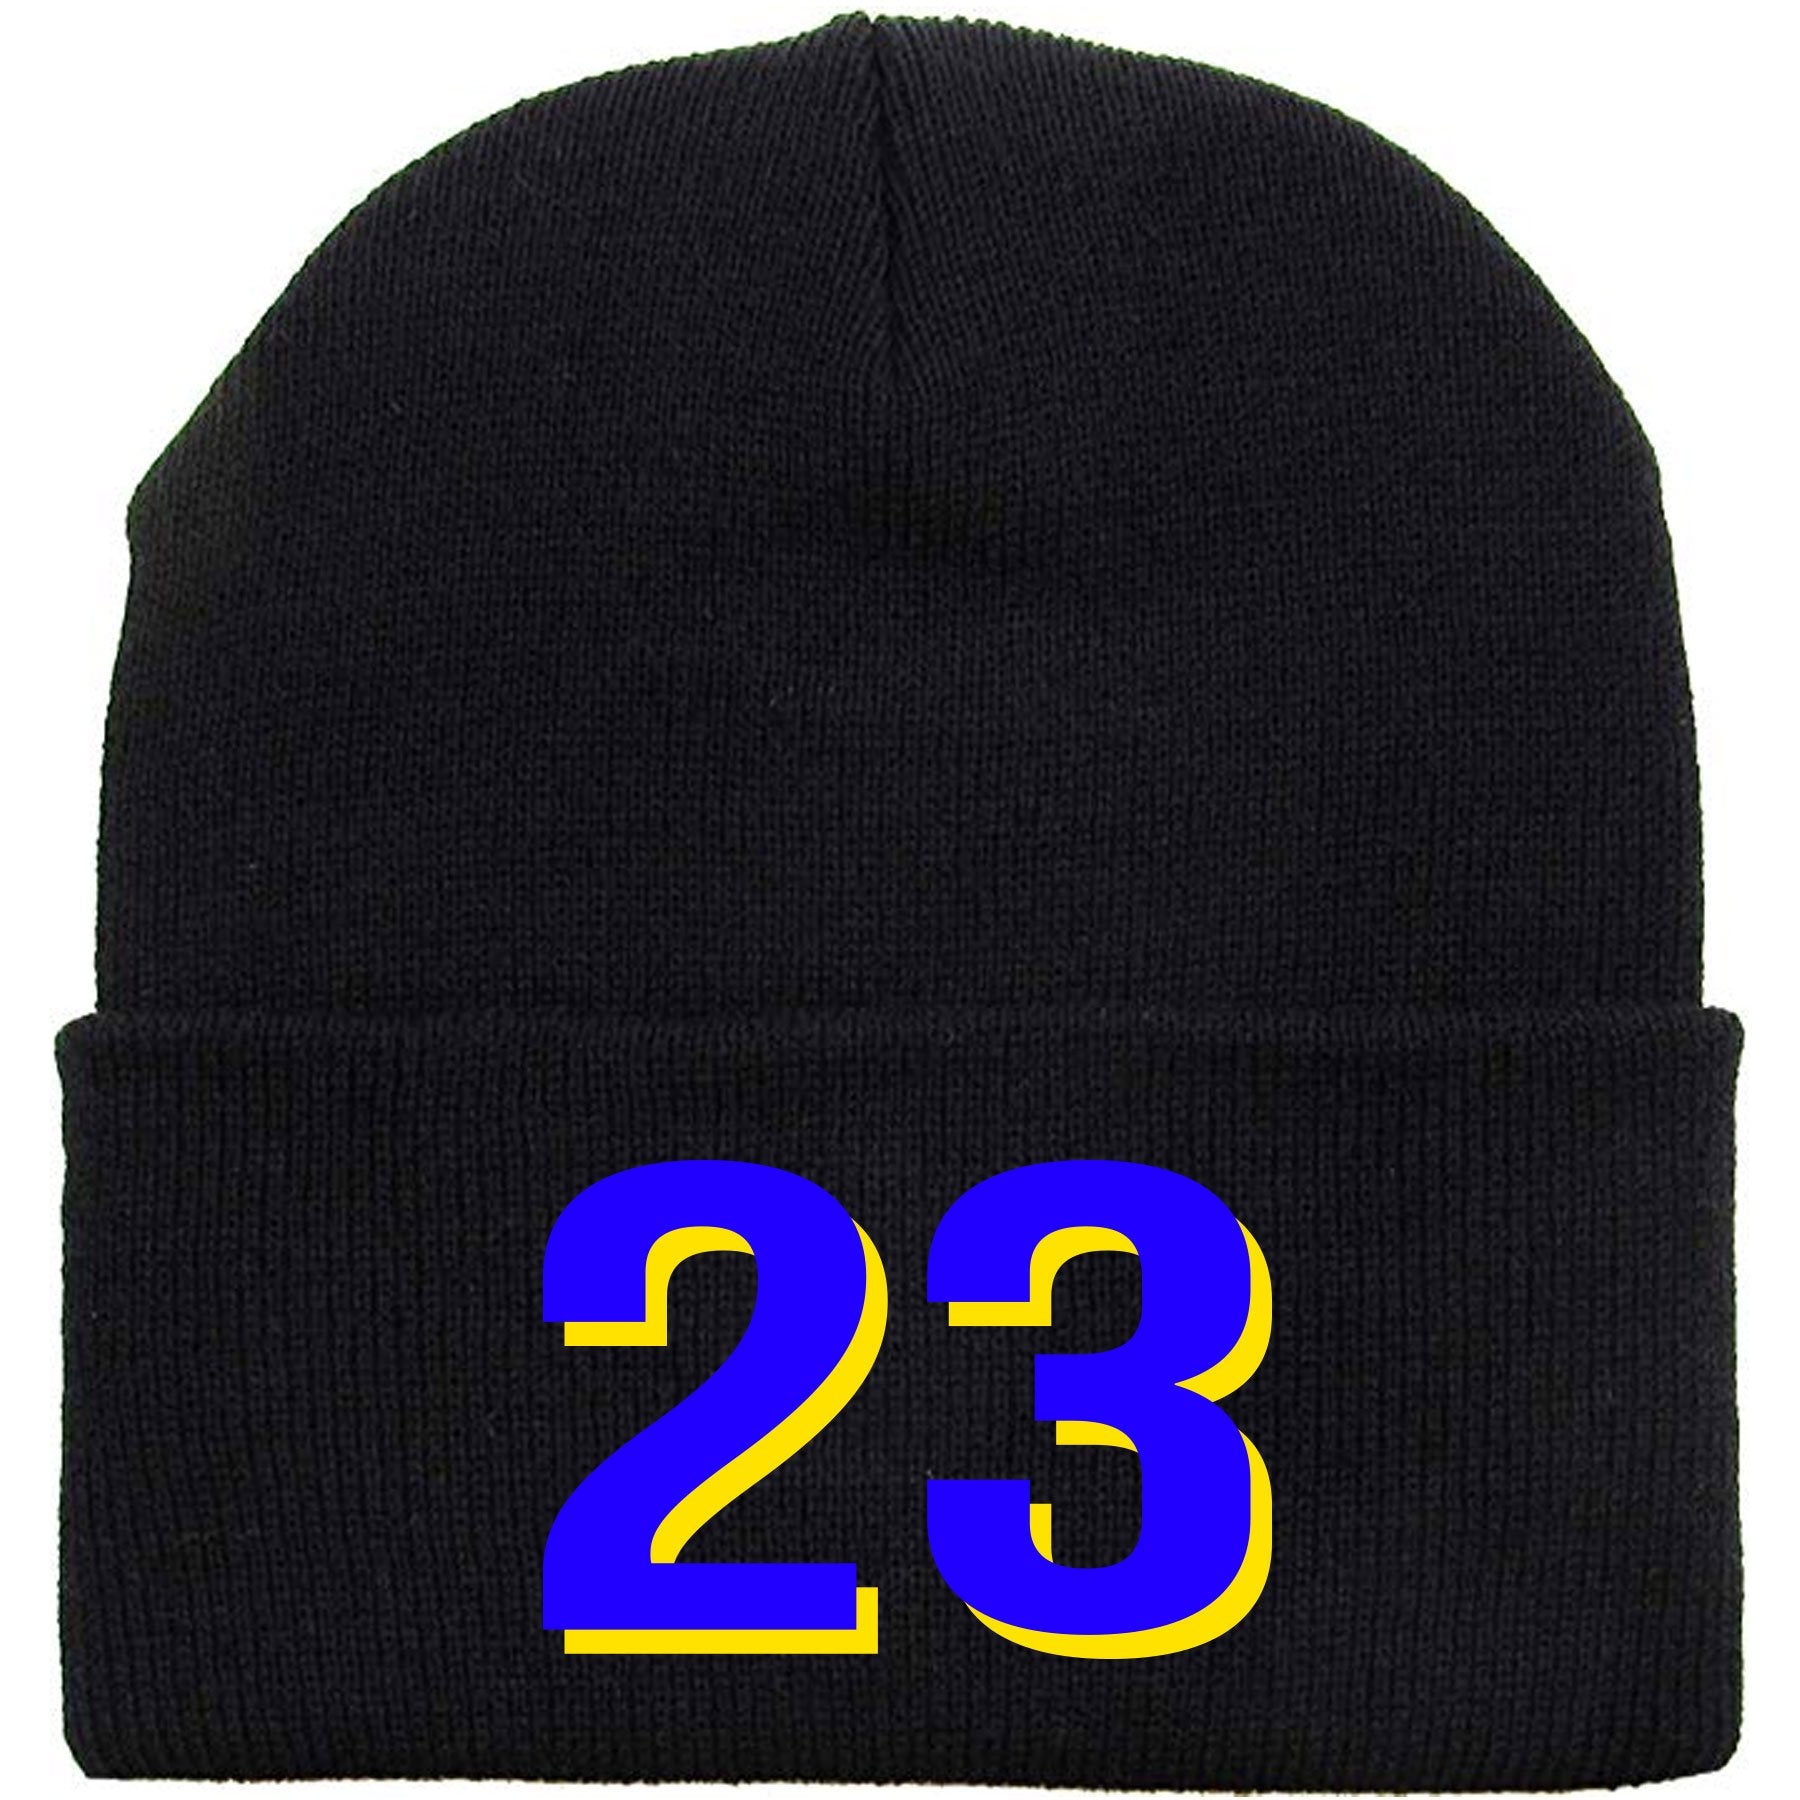 Embroidered on the front of the Air Jordan 5 Laney sneaker matching beanie is the 23 logo in blue and yellow